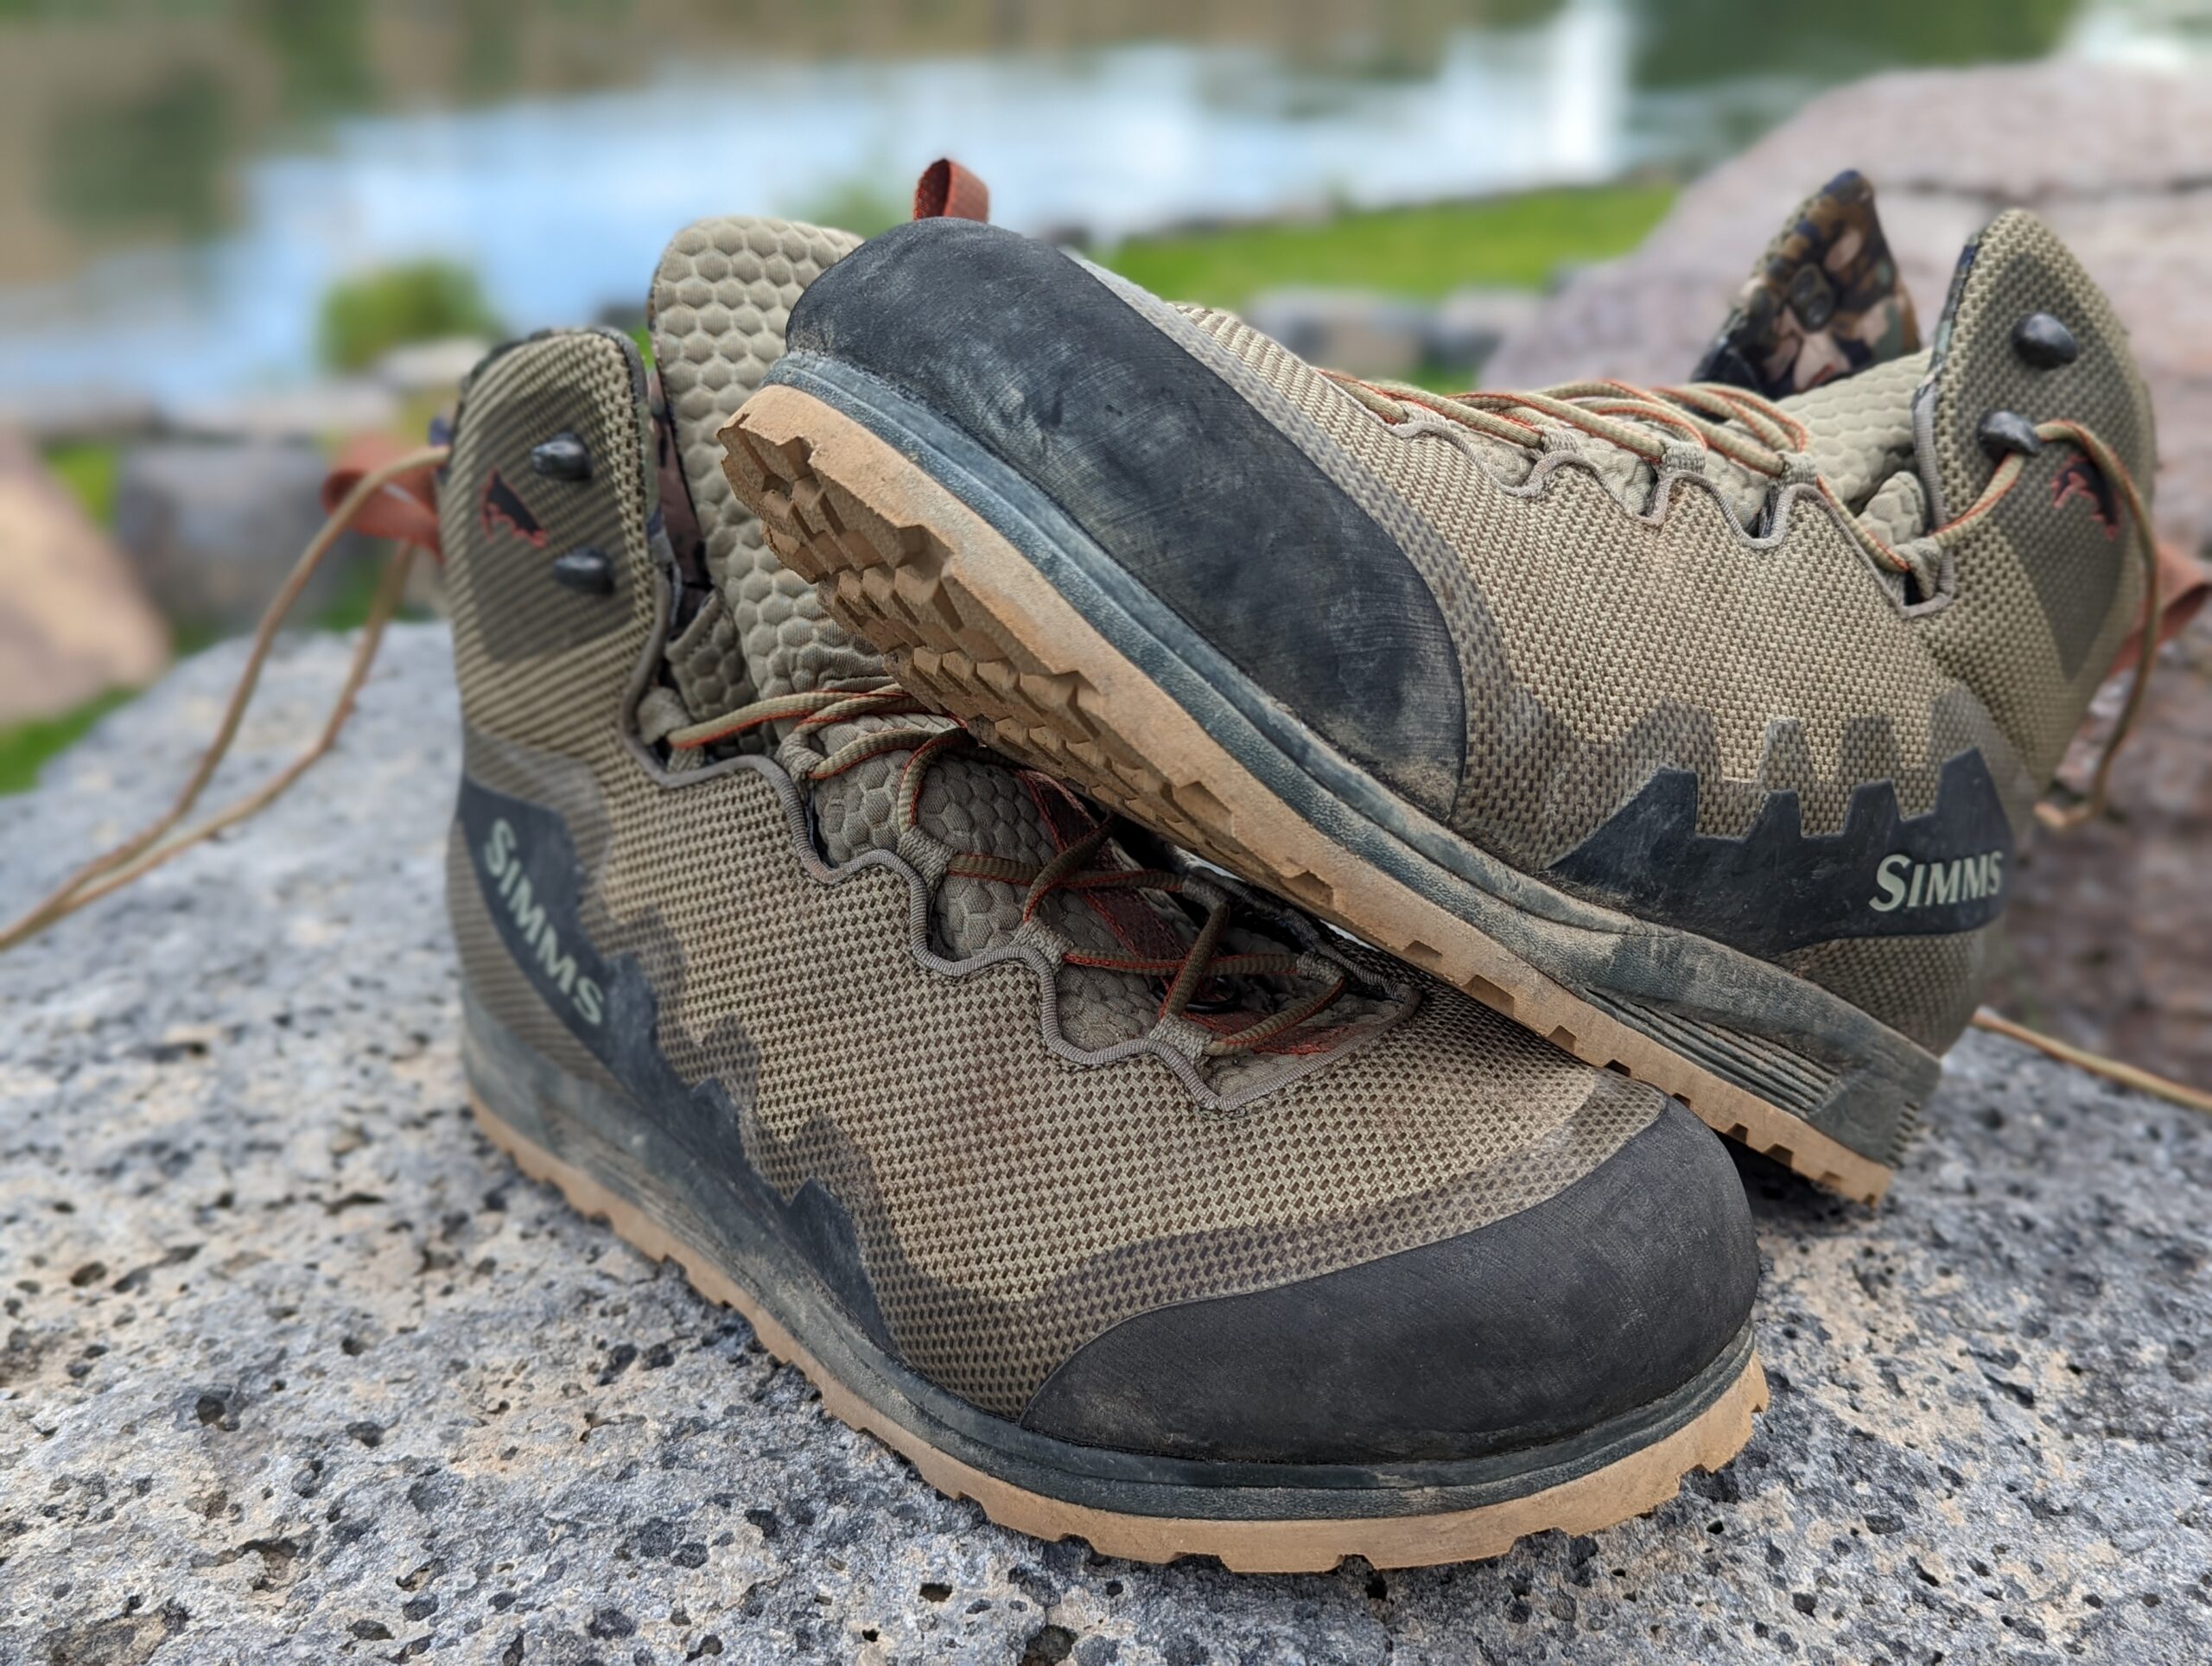 The flyweight access is like a hiking boot for wading